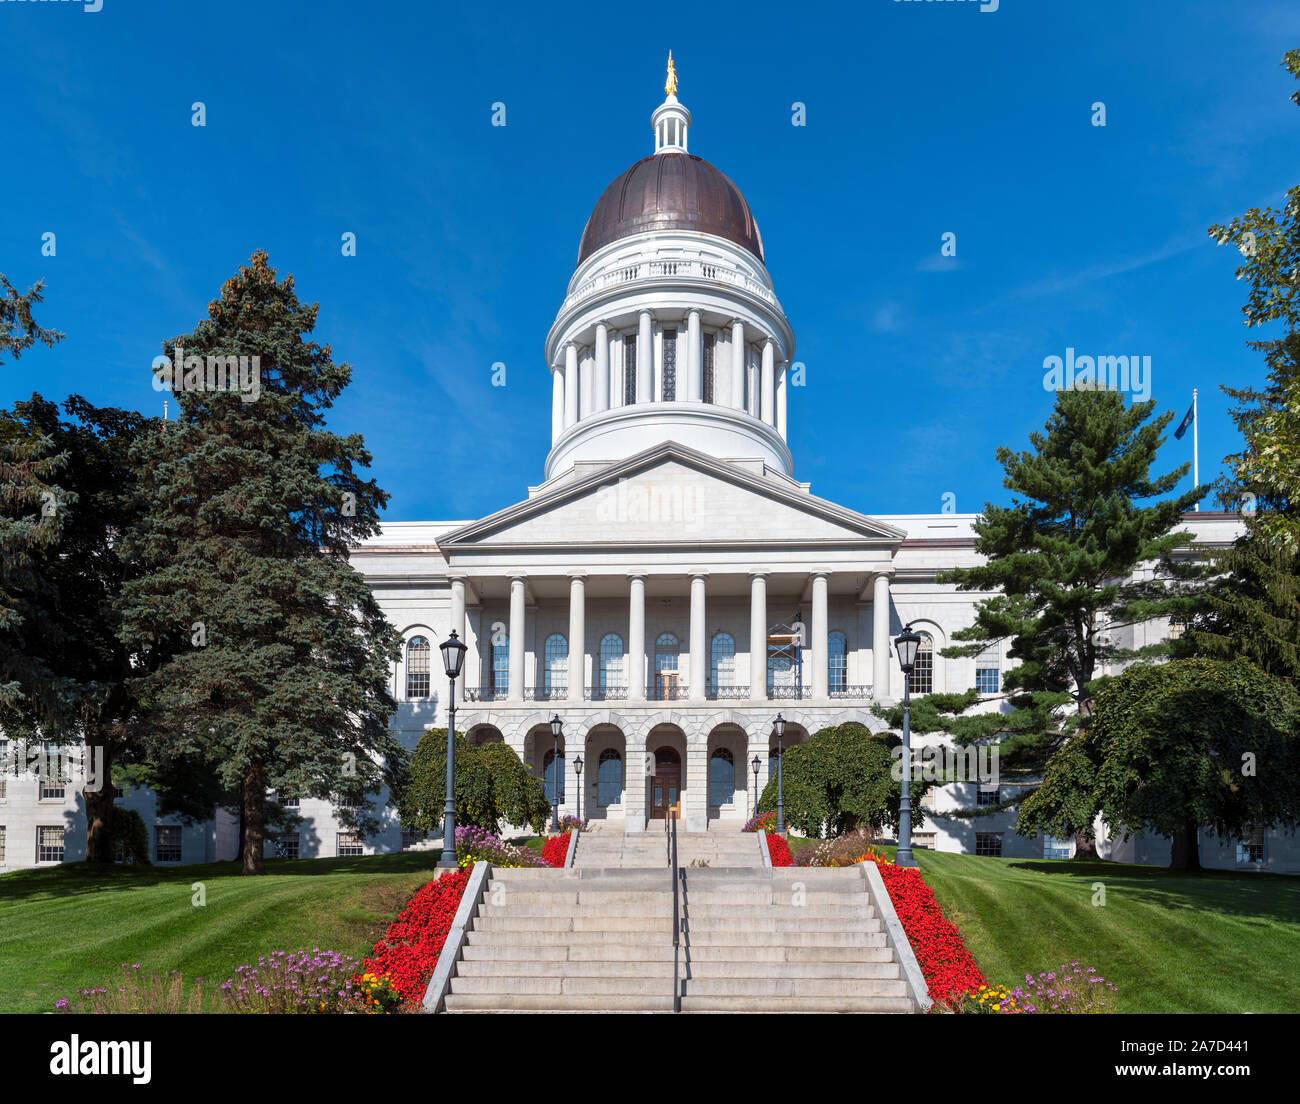 Maine State Capitol (State House), Augusta, Maine, USA Stockfoto